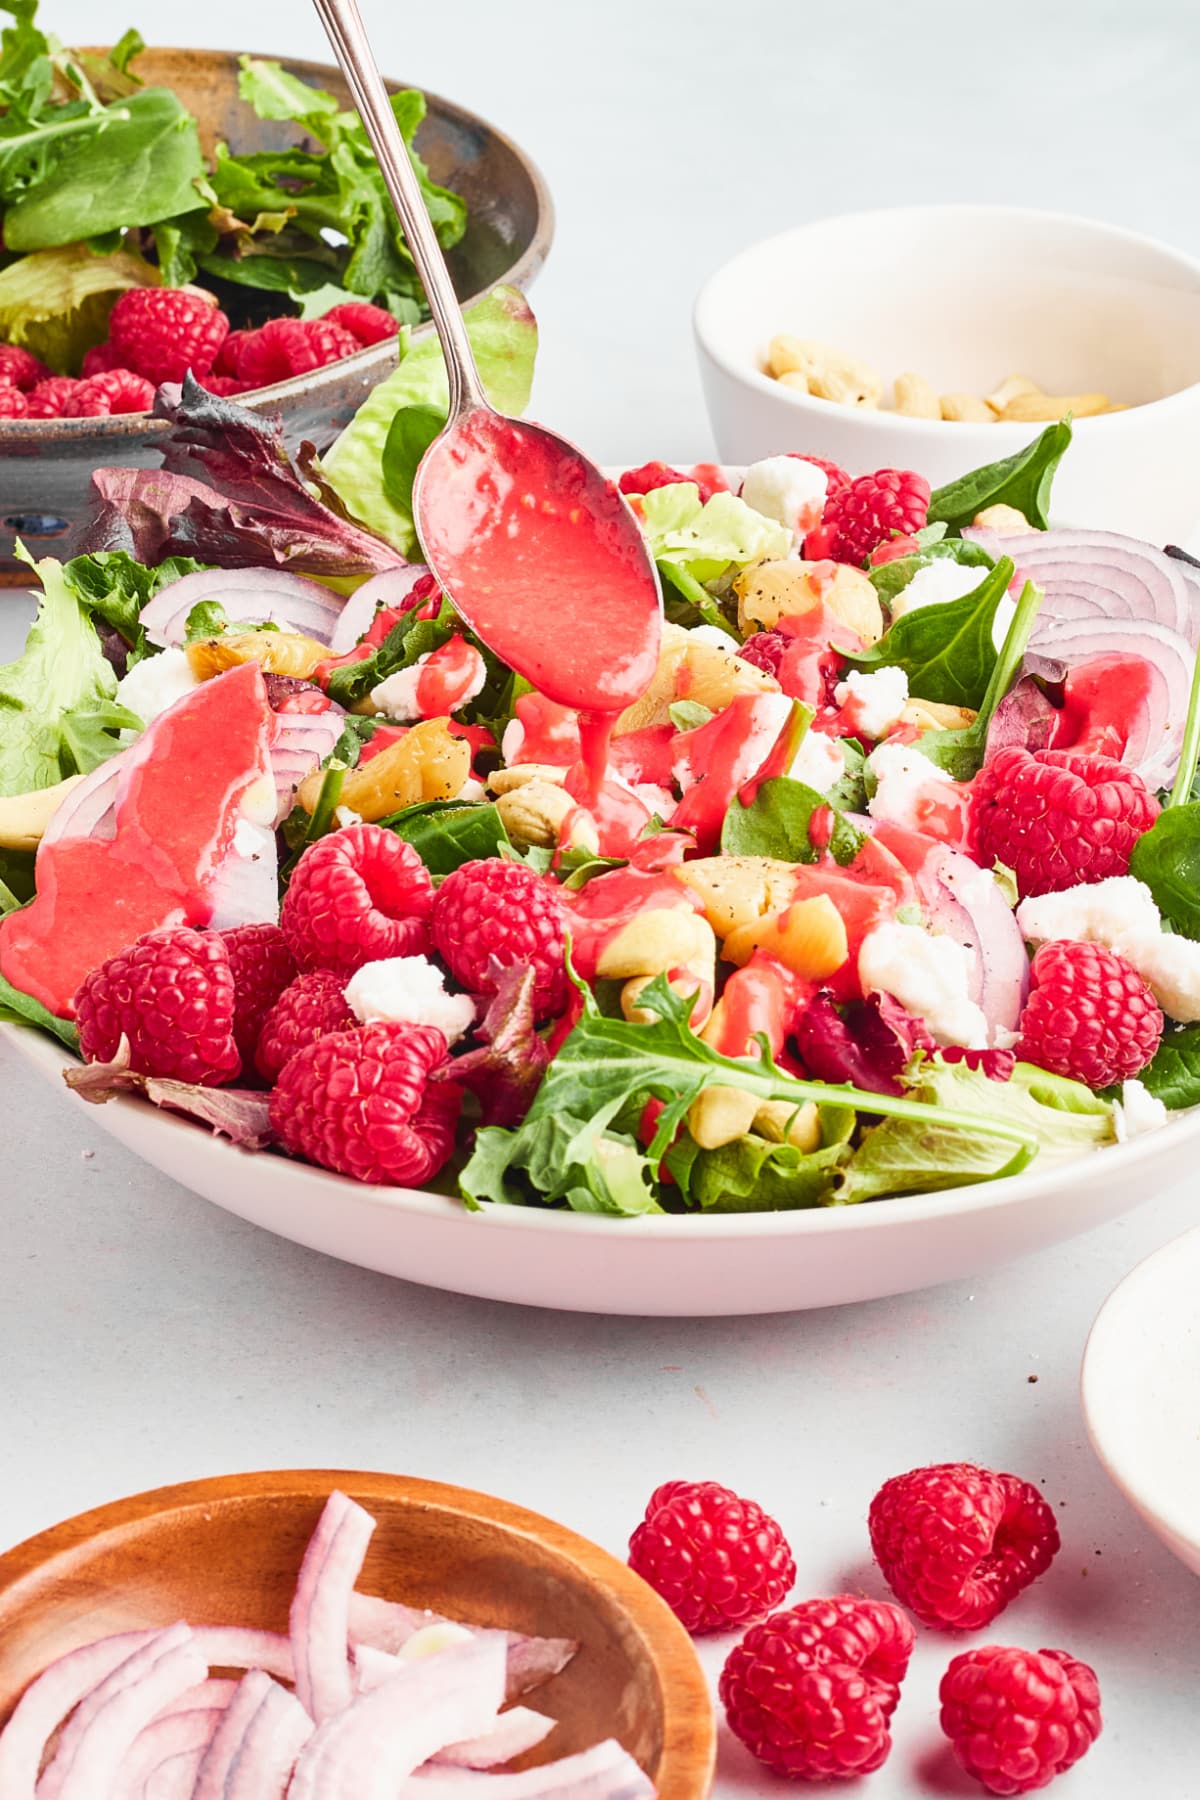 A mixed greens salad with roasted garlic and fresh raspberries. The salad is served in a large white bowl and sitting on a white surface, and a spoon is drizzling a bright red raspberry vinaigrette over the salad. A rustic blue colander holds more greens and berries and sits next to the salad. Small bowls hold sliced red onion, cashews, and vegan goat cheese.